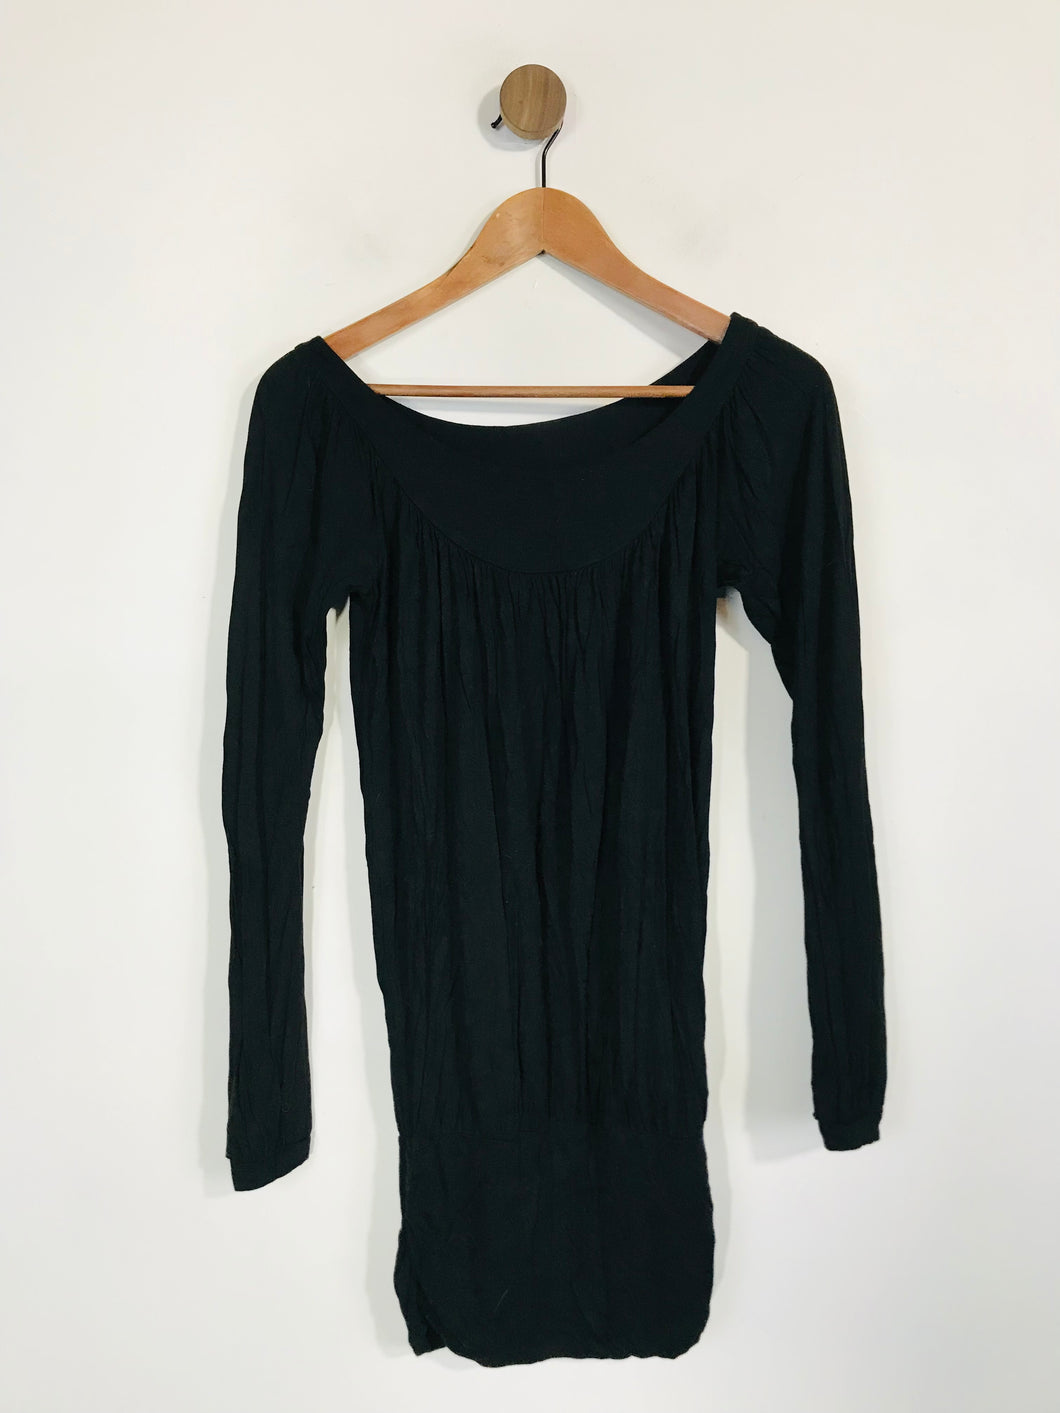 French Connection Women's Blouse | XS UK6-8 | Black